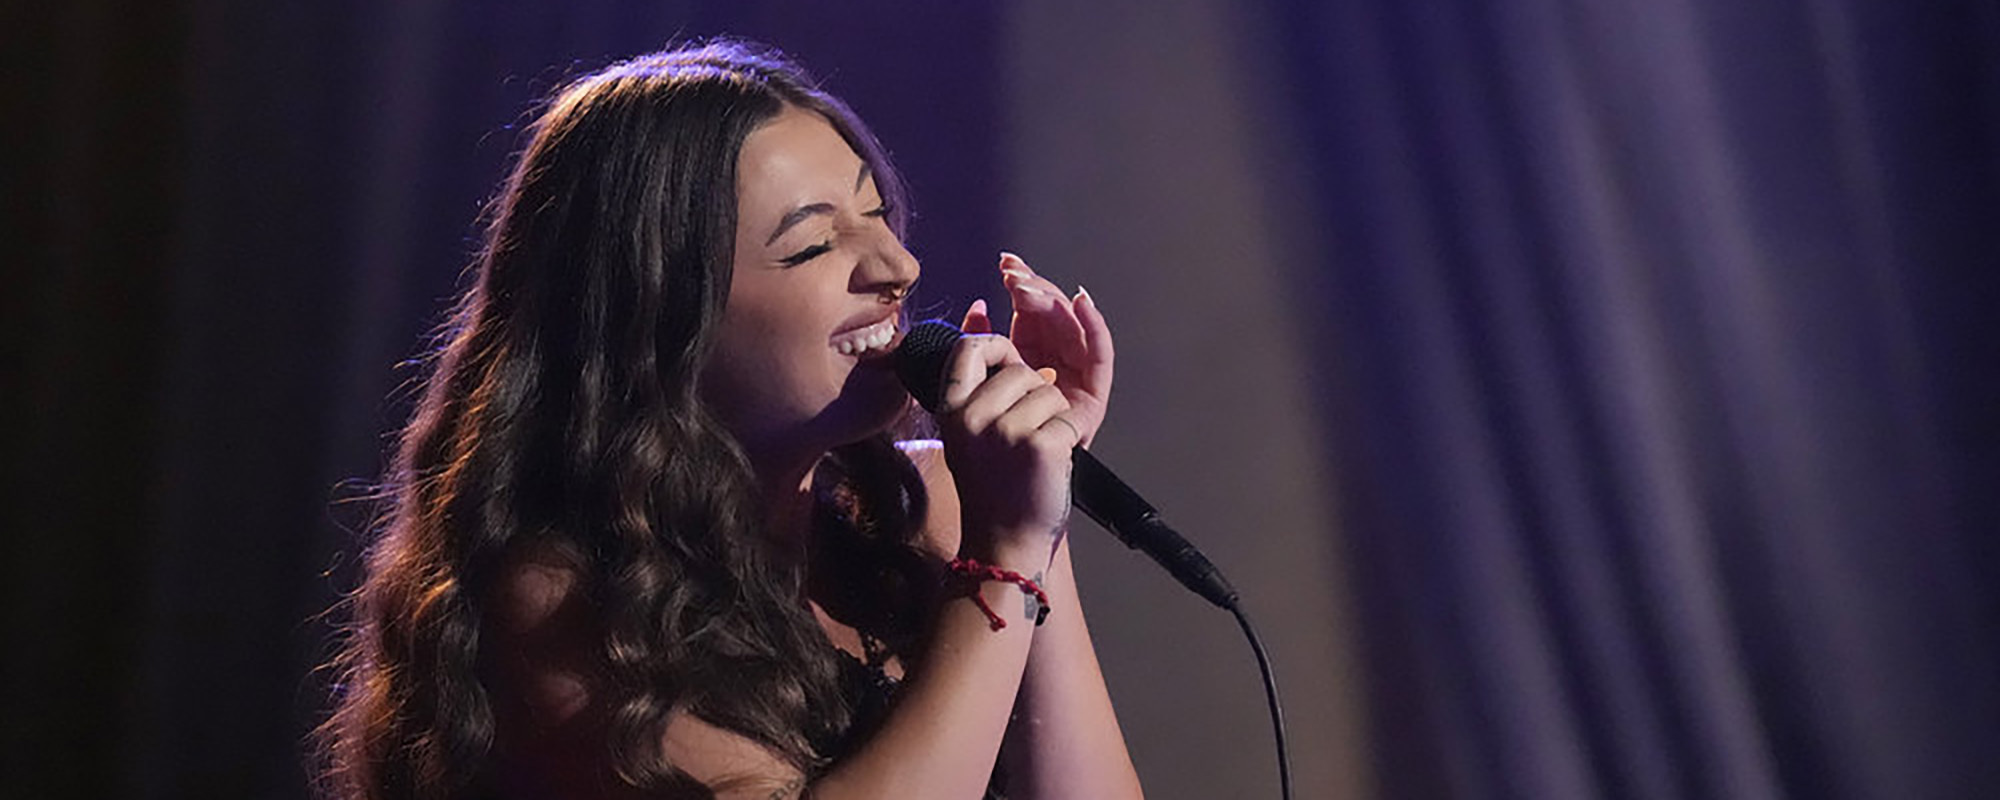 Watch: ‘The Voice’ Contestant Nini Iris Wins Her Knockout Round with a “Supernatural” Rendition of Radiohead’s “Karma Police”